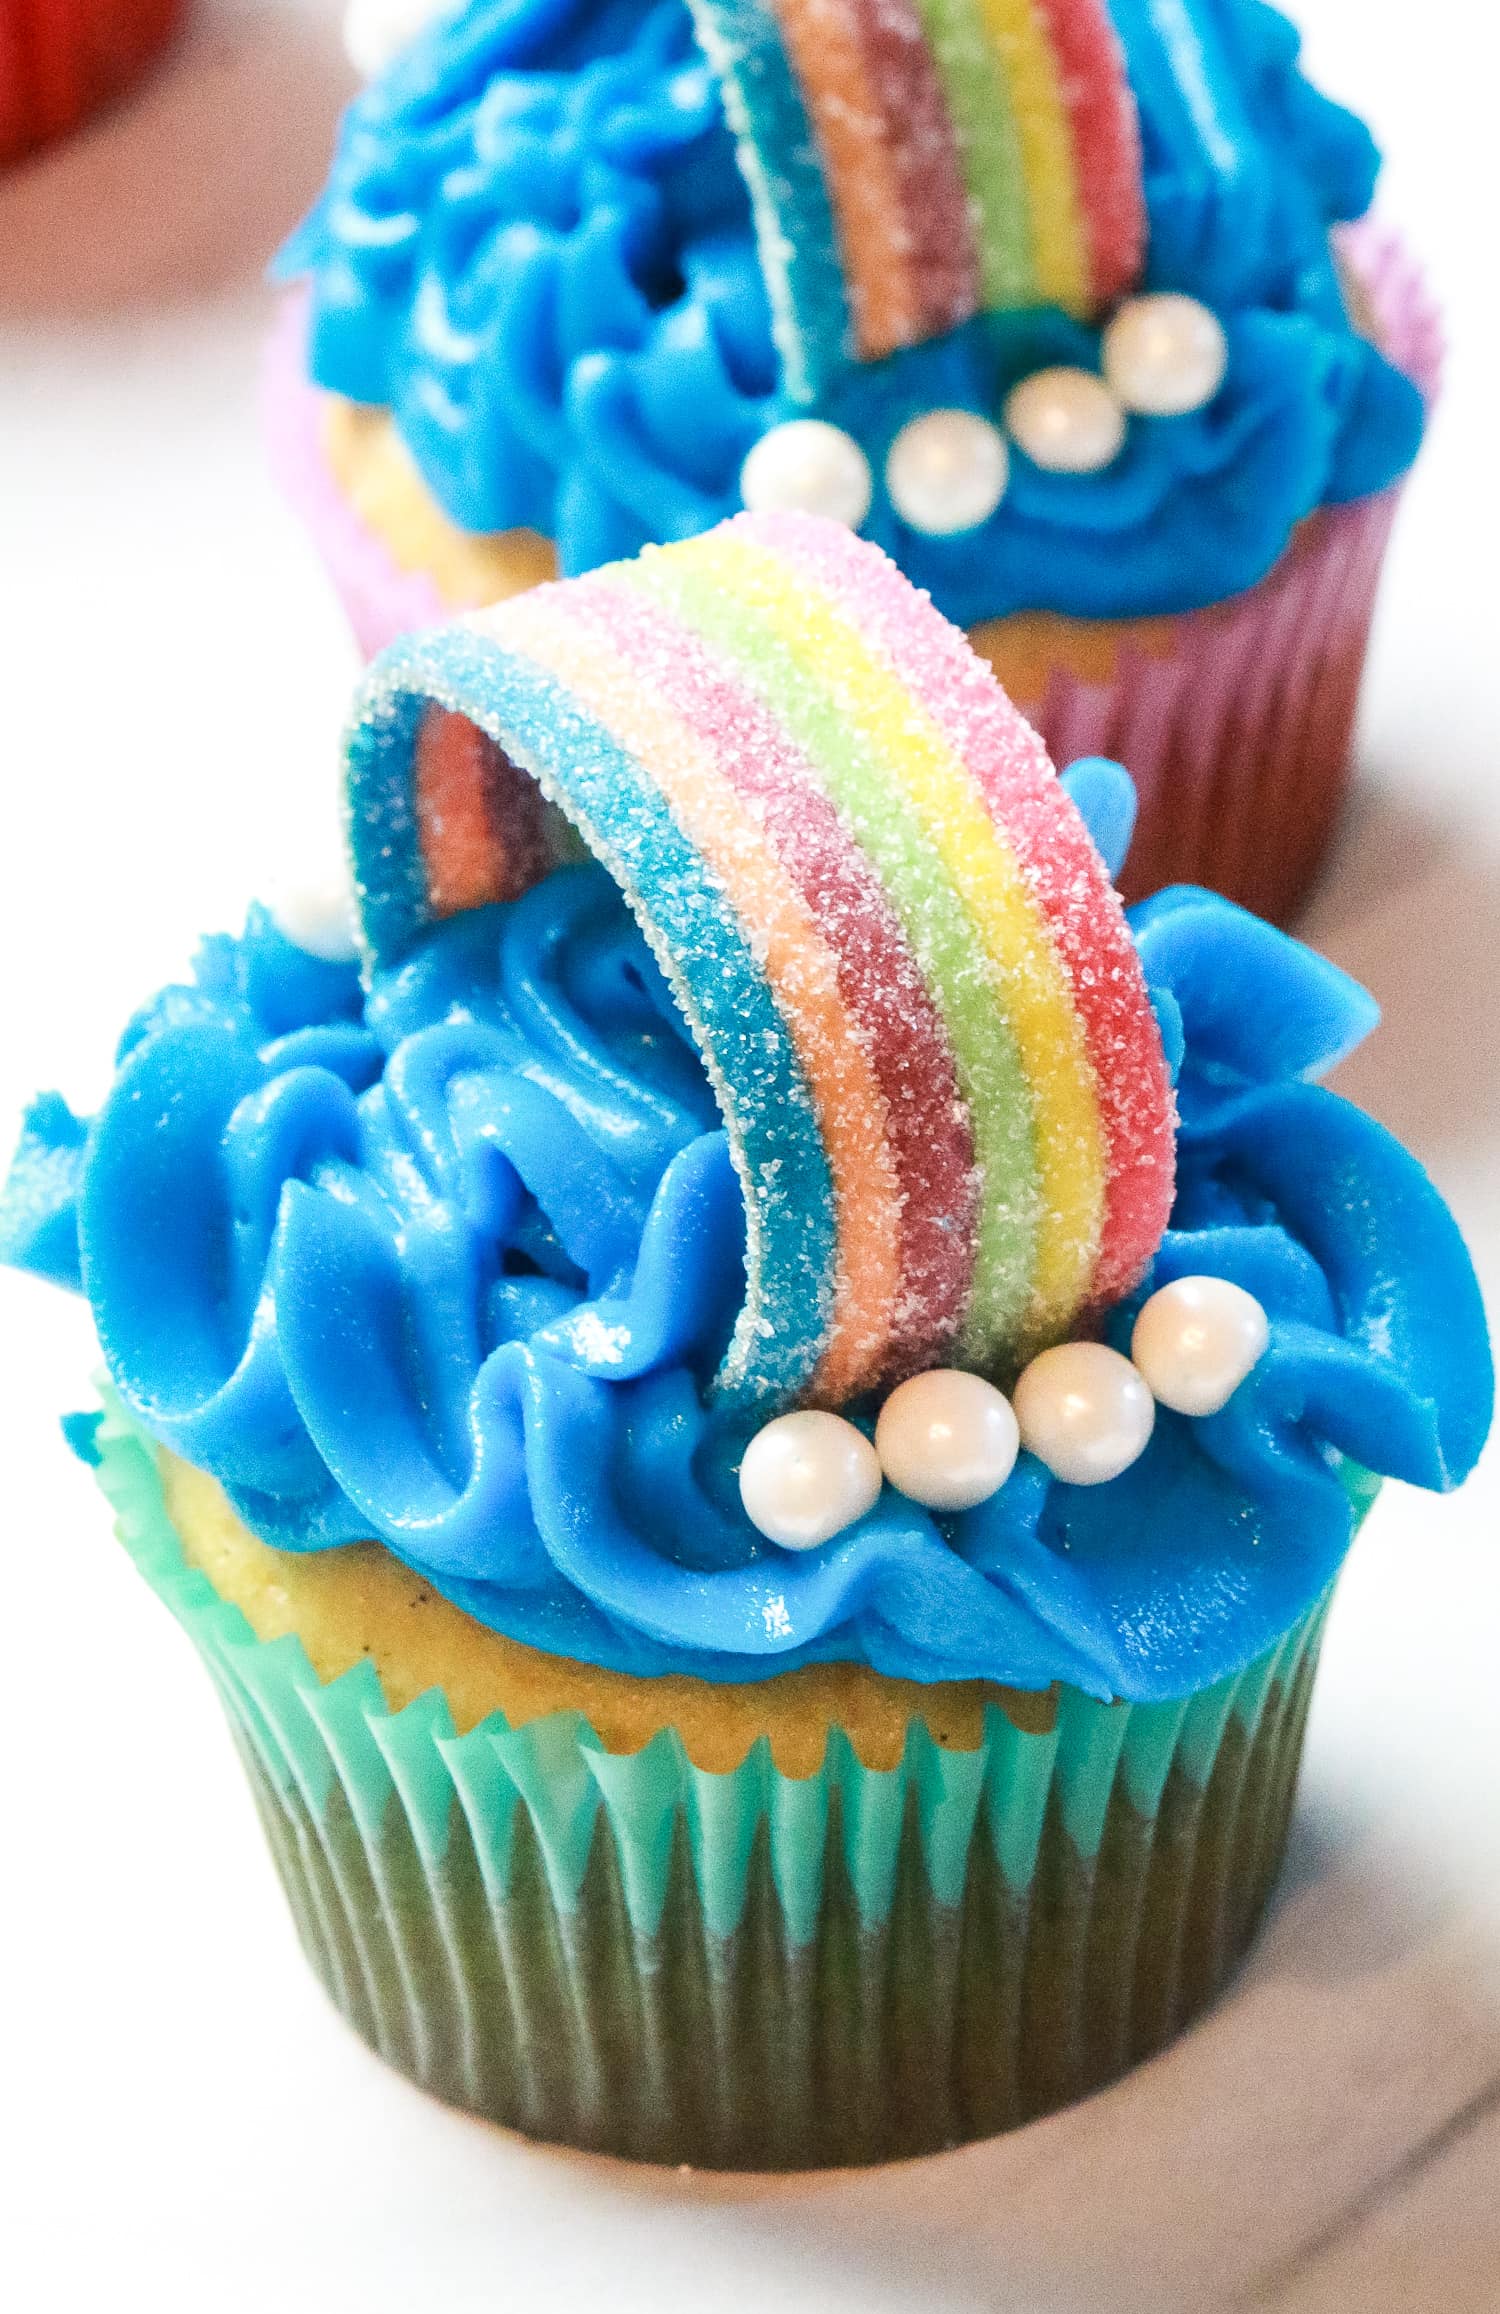 Cupcake decorated with blue frosting and rainbow candy